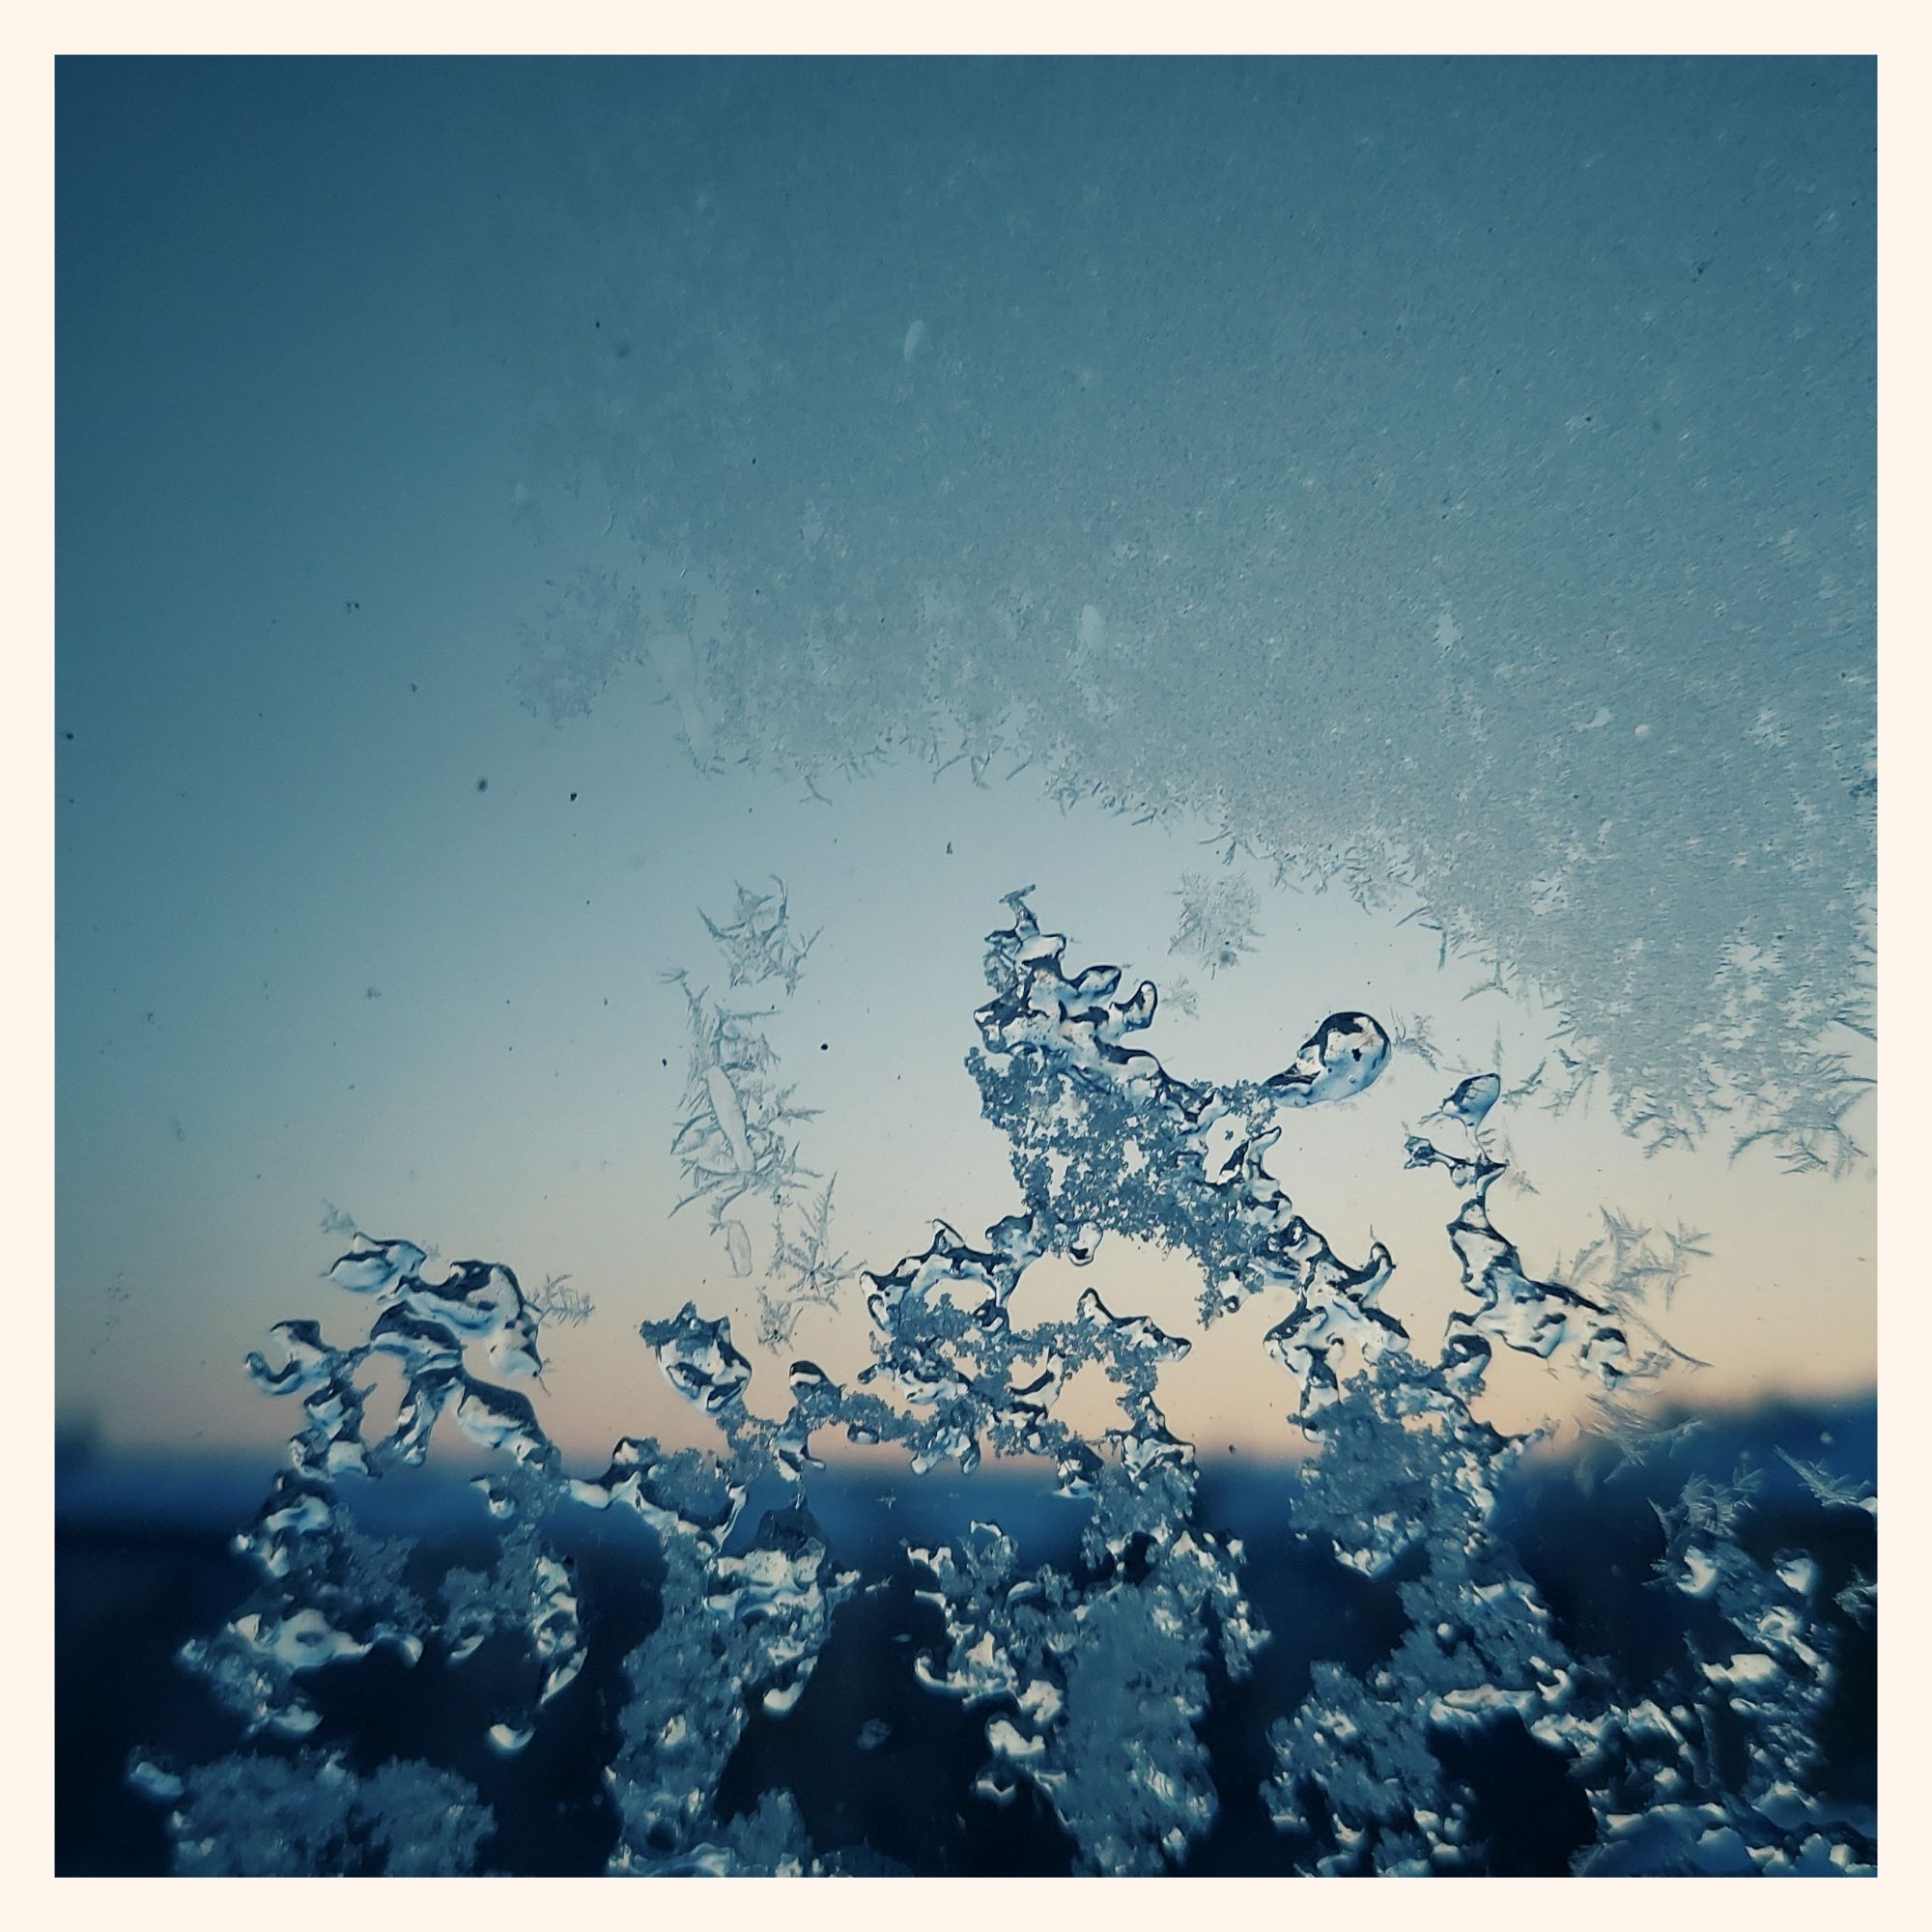 Ice structures on a window, in front of morning dawn.